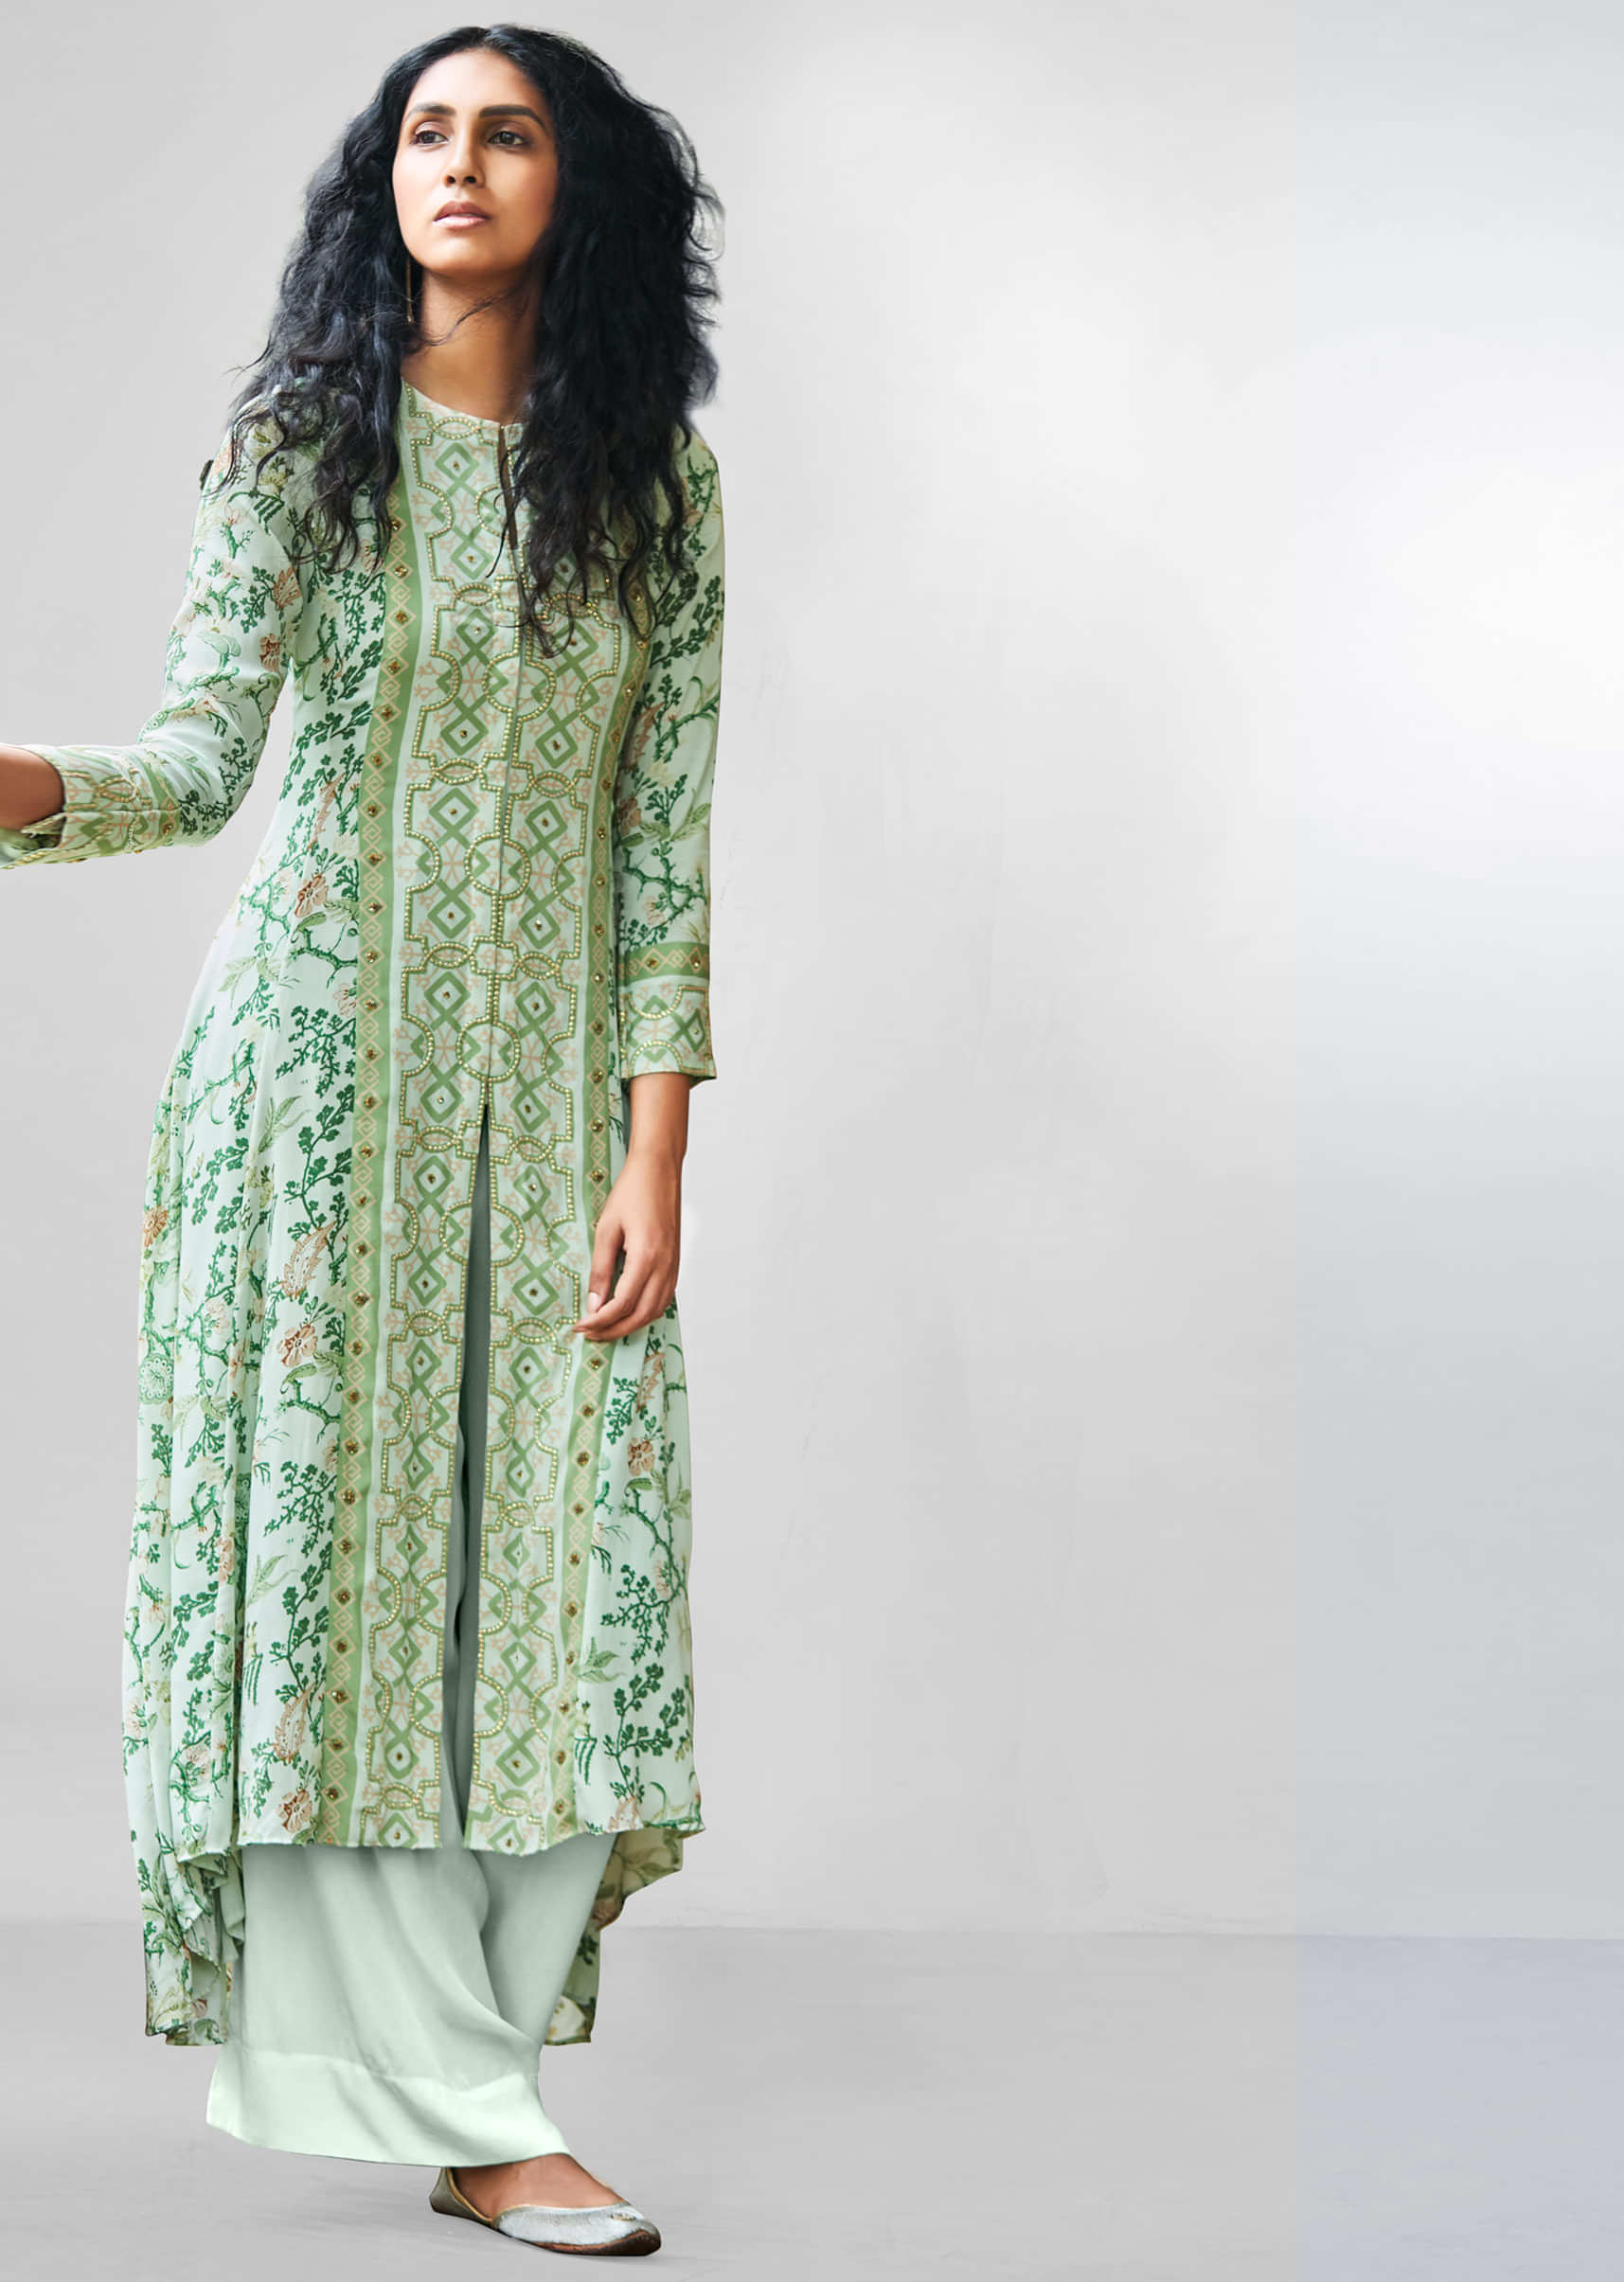 Sea green floral printed palazzo suit with center panel embroider and front slit